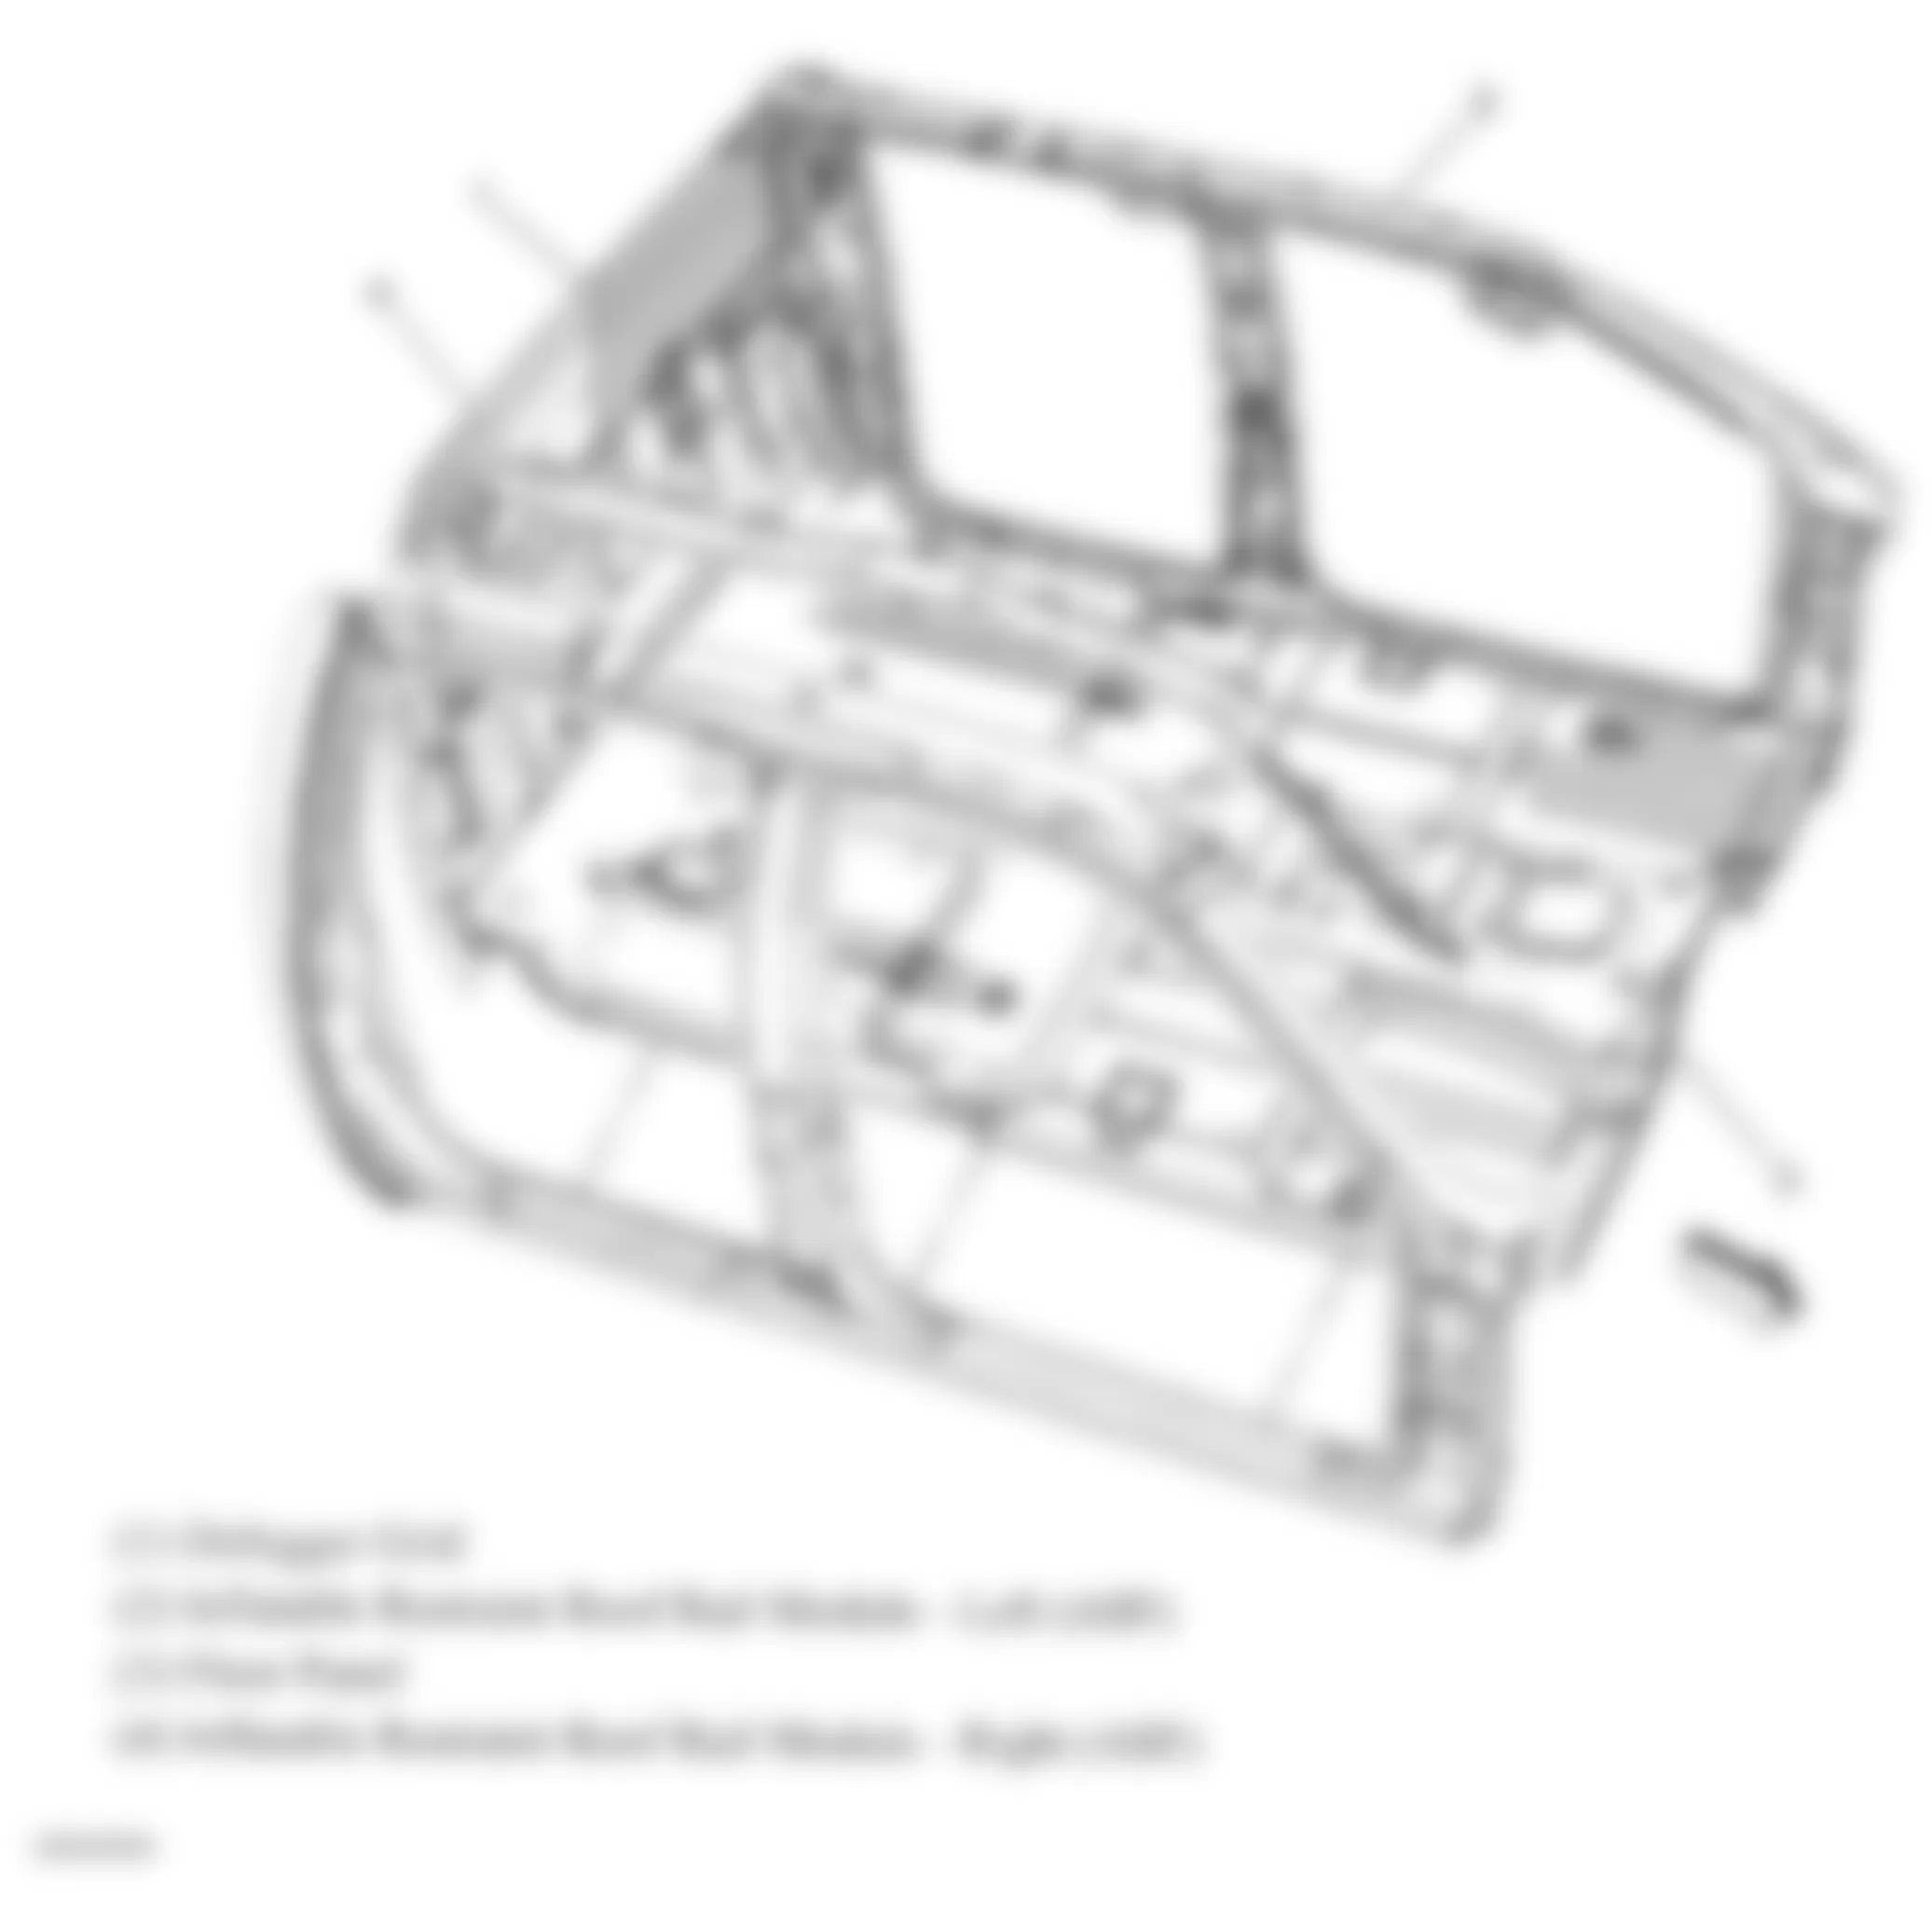 GMC Sierra 3500 HD 2007 - Component Locations -  Roof Rail Air Bags (Extended Cab & Crew Cab)